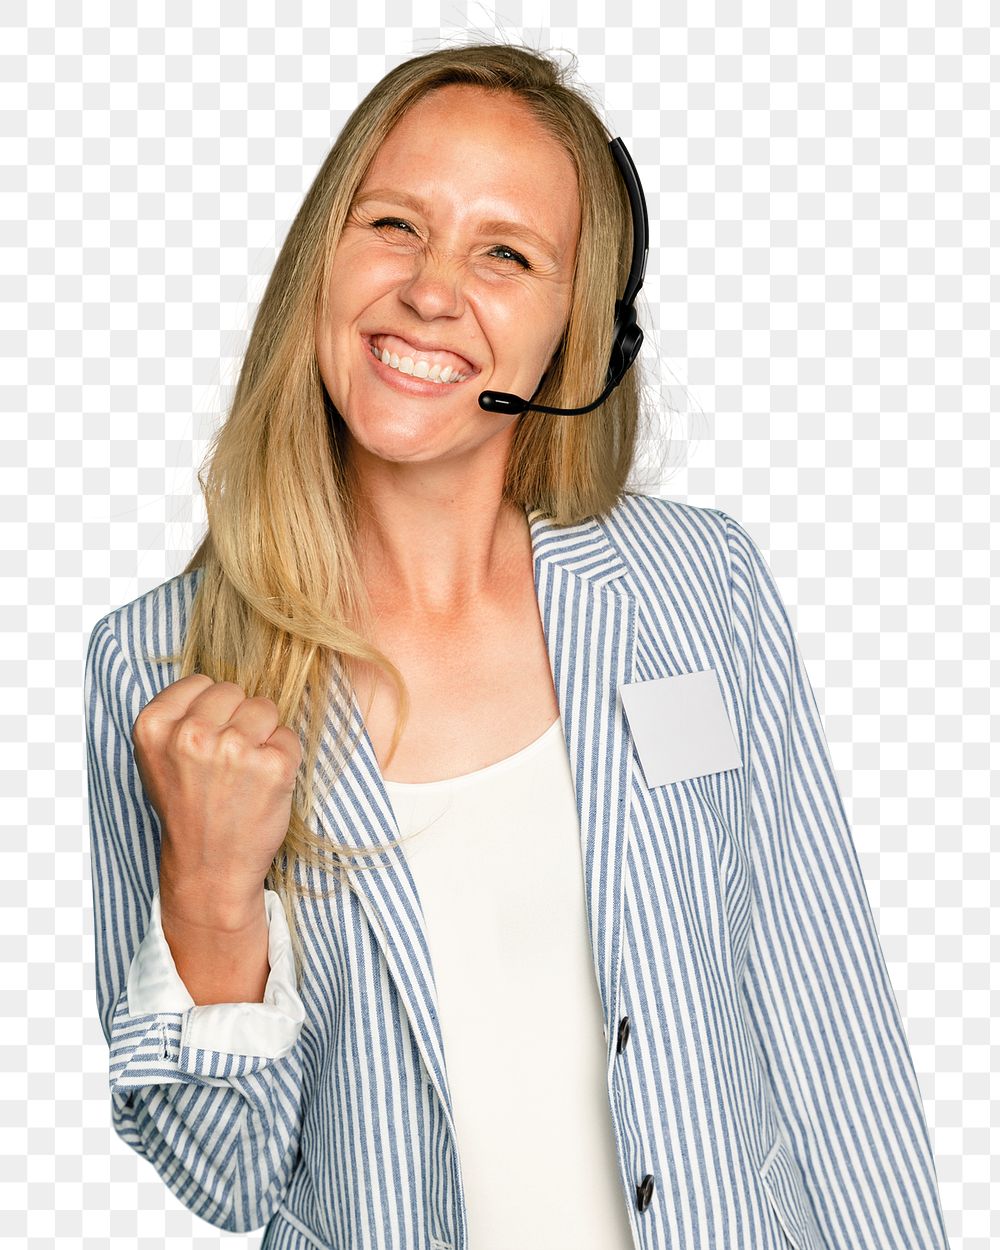 Customer service female employee mockup png with a headset